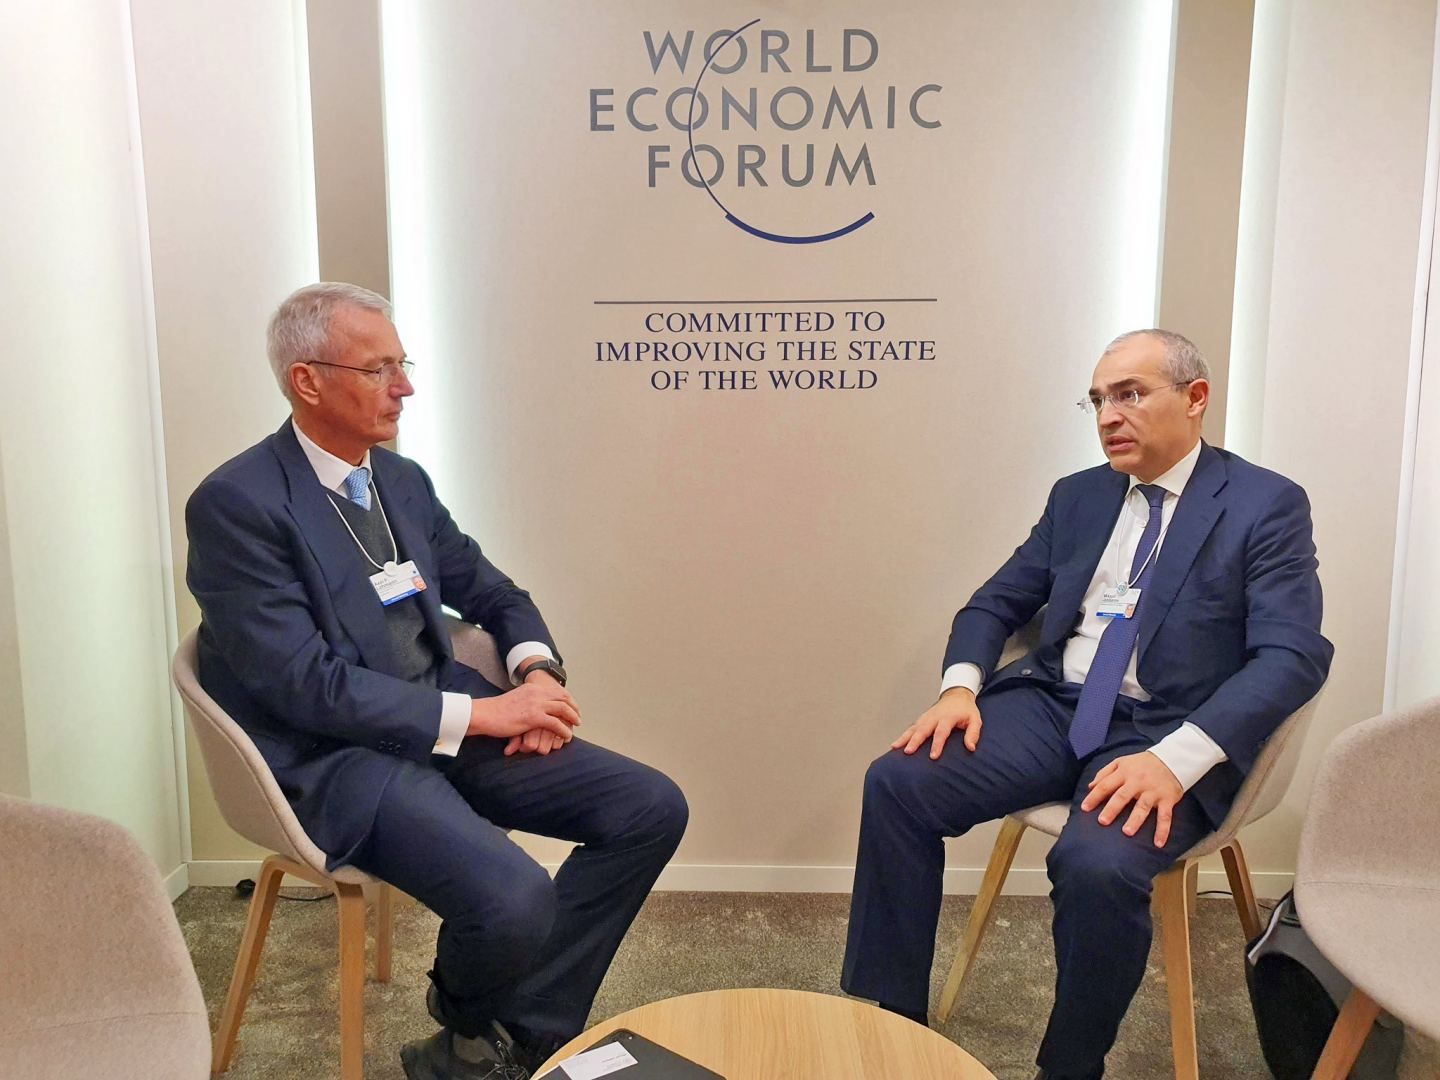 Azerbaijan's economy minister, head of Credit Suisse discuss potential areas of collaboration